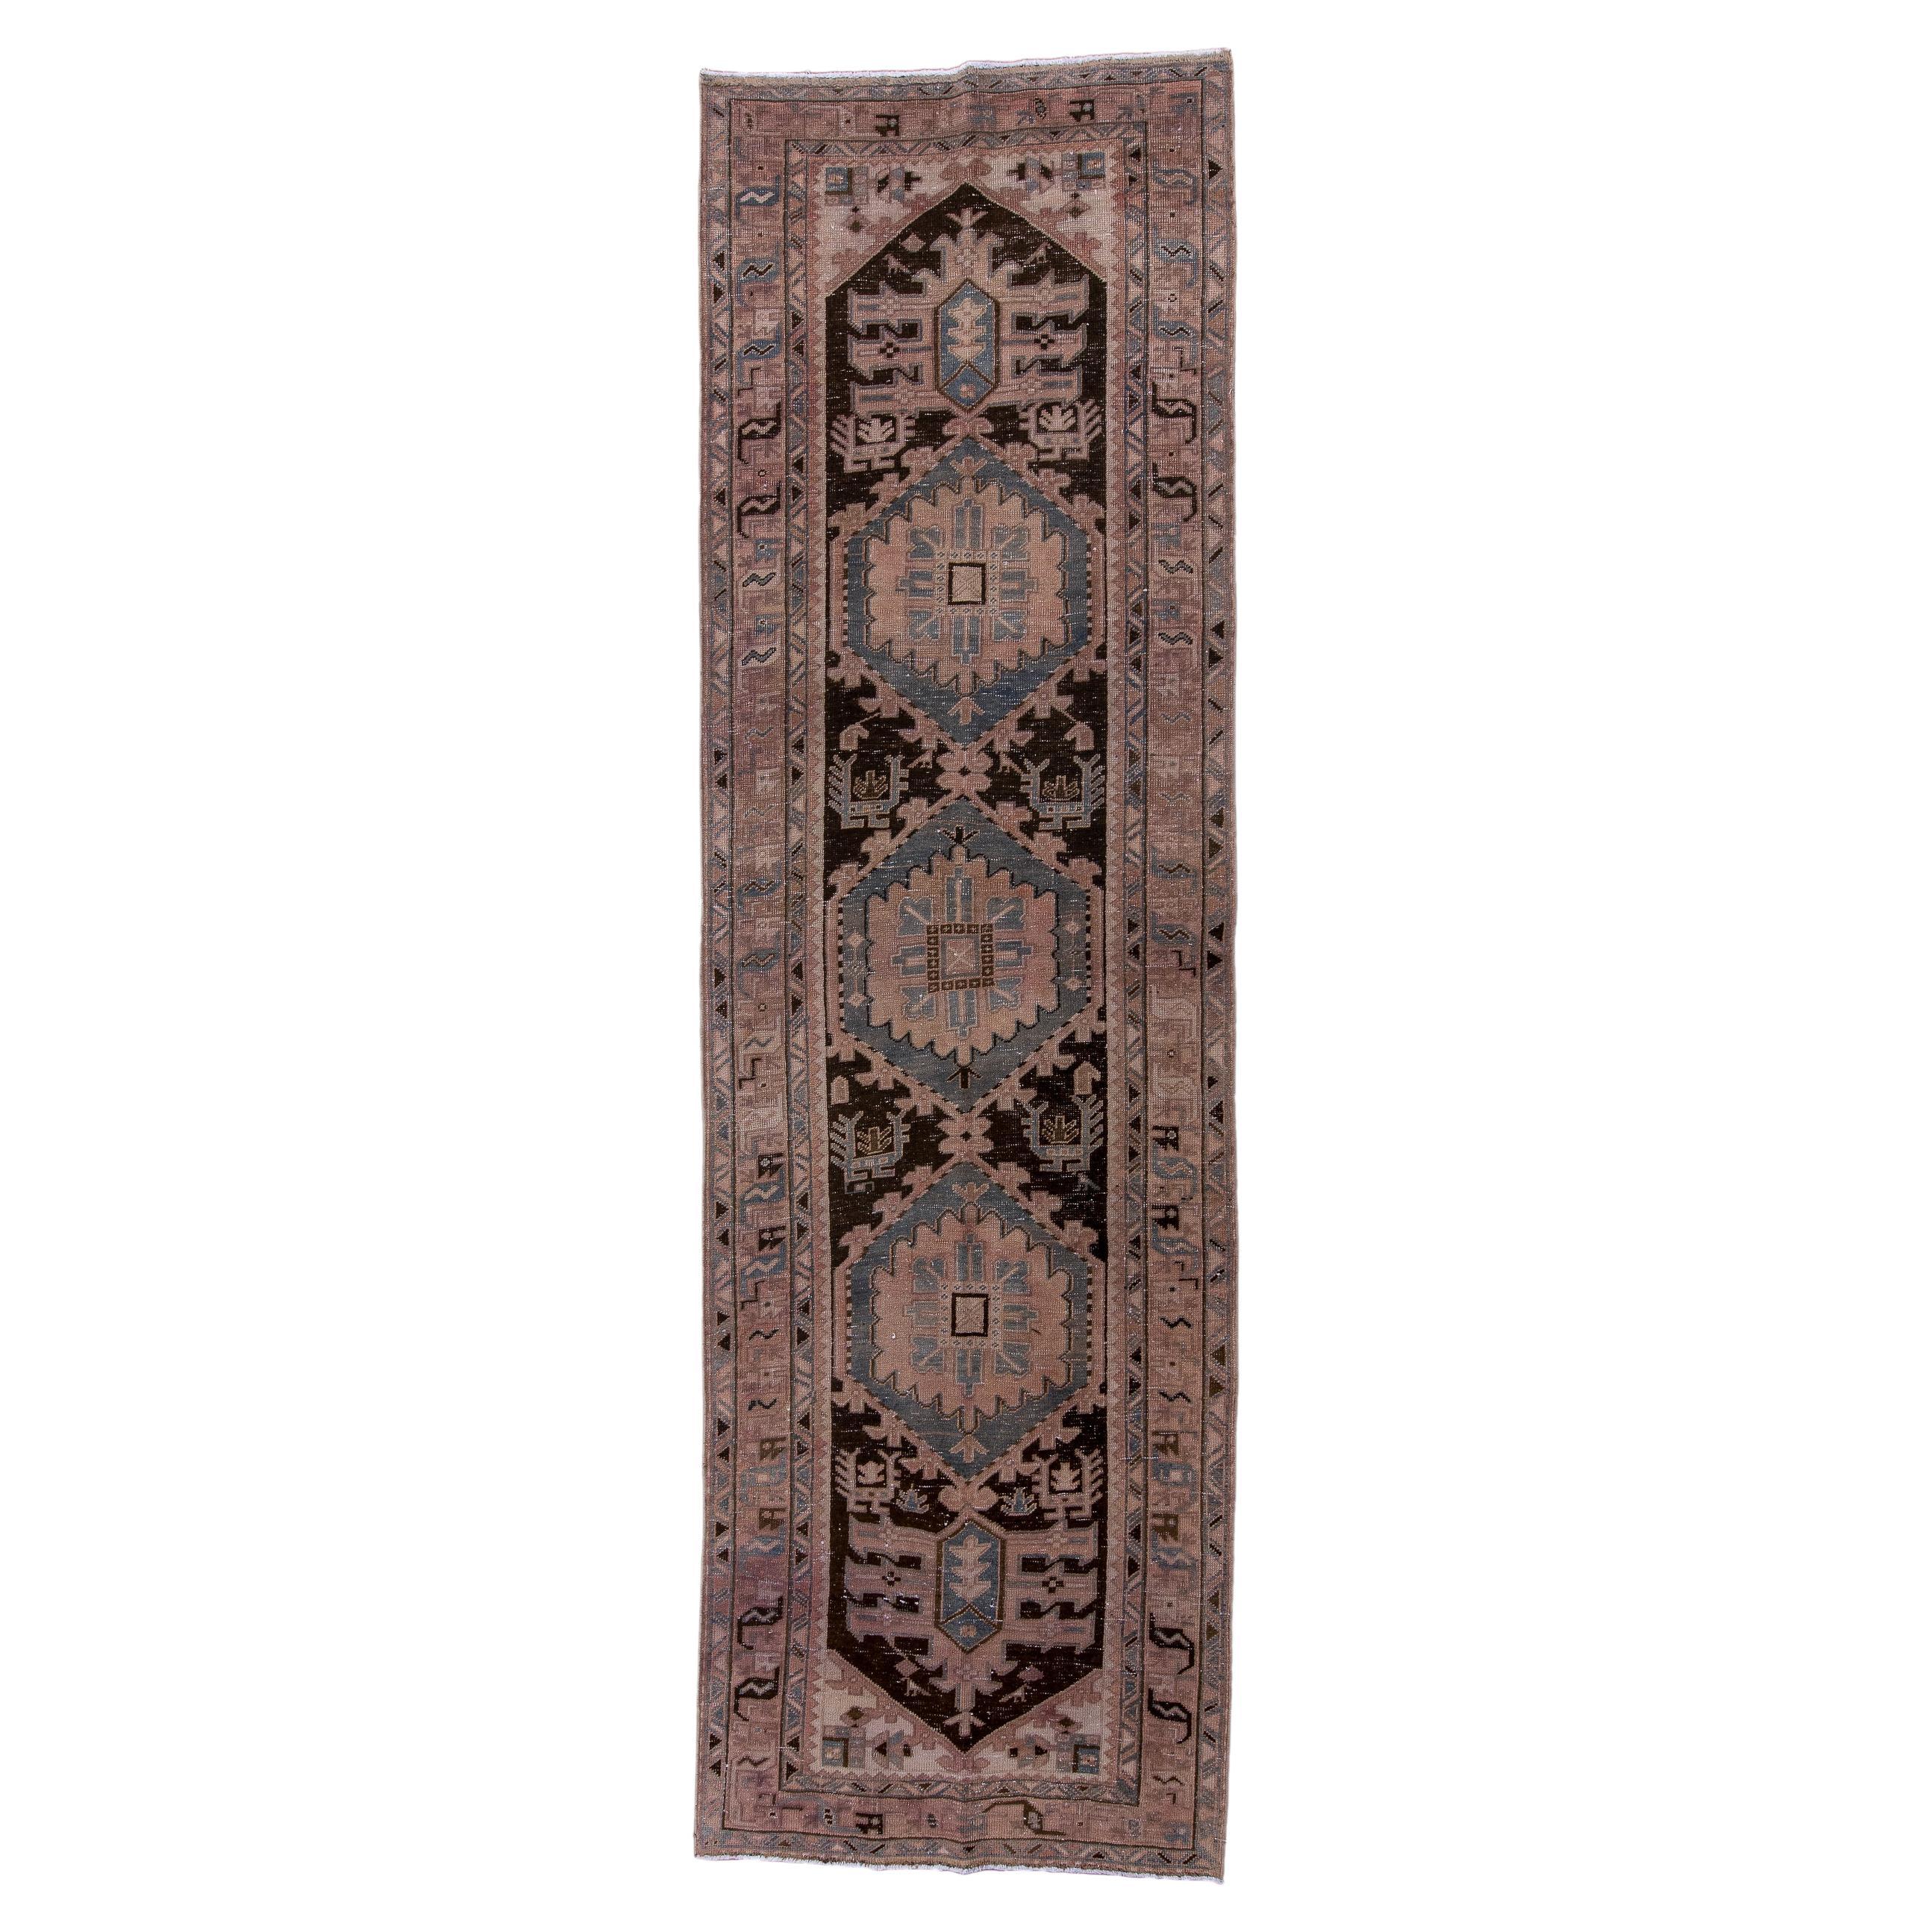 Antique Sarab Runner with Dark Field and Floral Designs, Circa 1900's